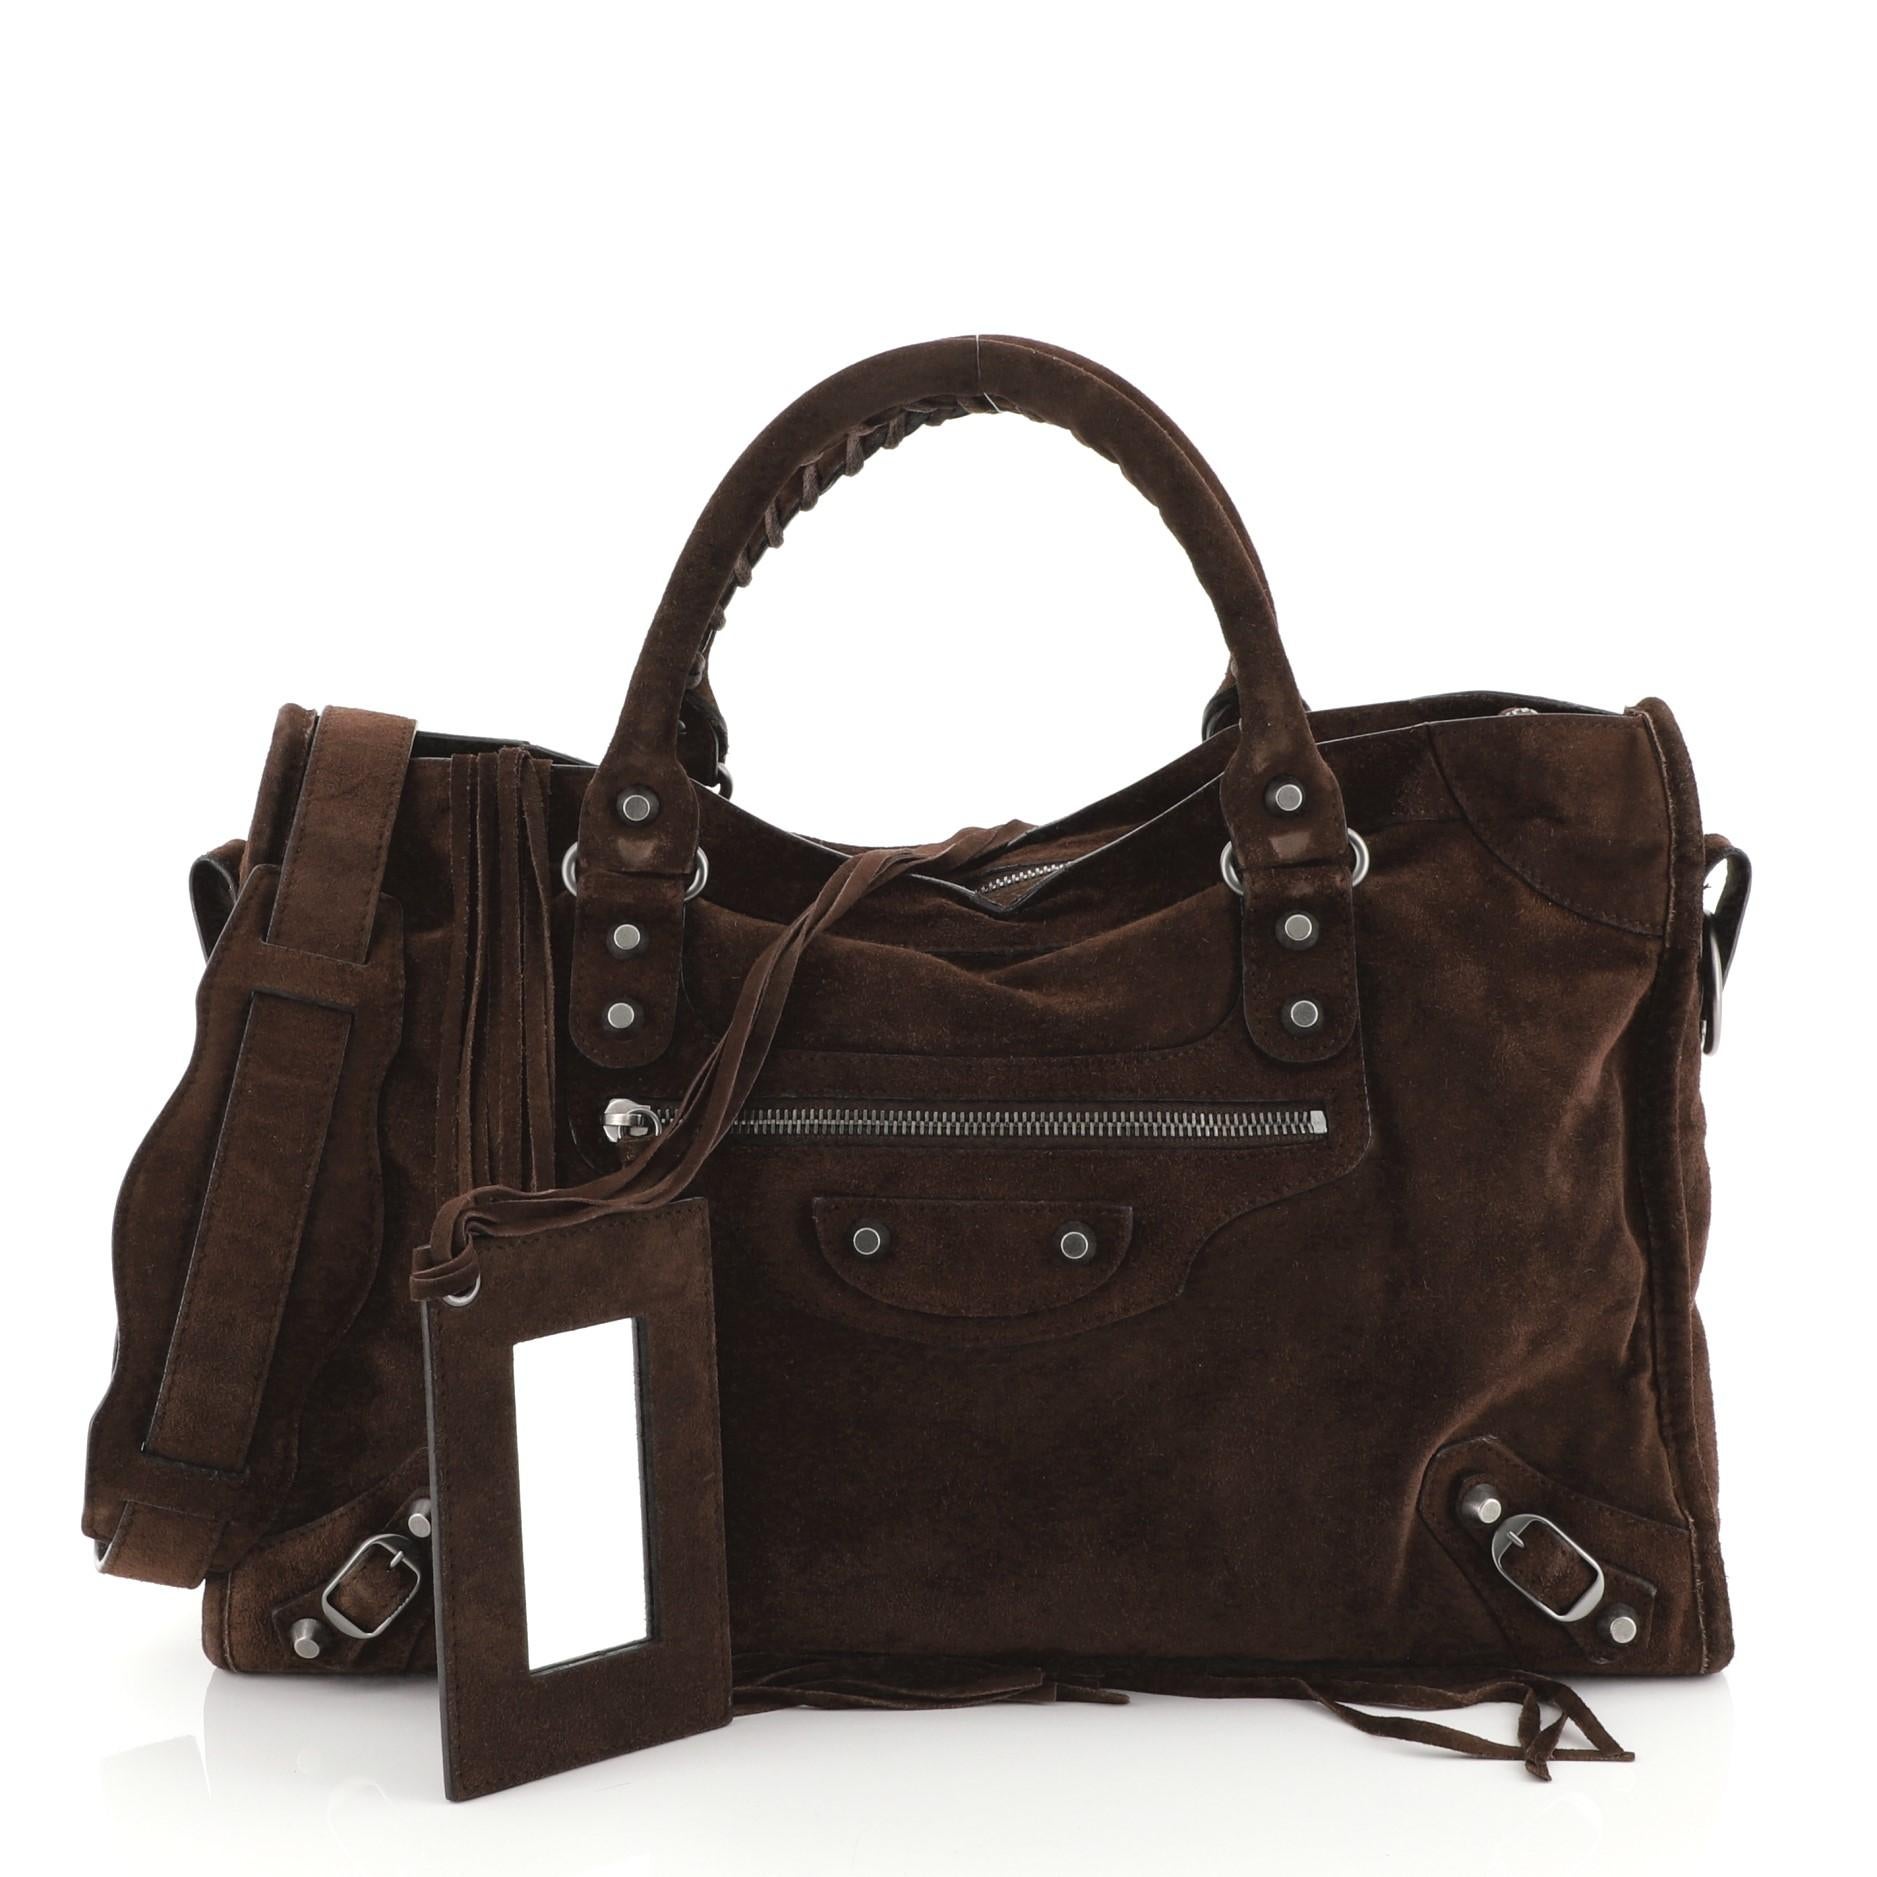 This Balenciaga Baby Daim City Classic Studs Bag Suede Medium, crafted in brown suede, features front zip pocket, braided hand-stitched handles, classic studs details and matte gunmetal-tone hardware. Its zip closure opens to a black fabric interior